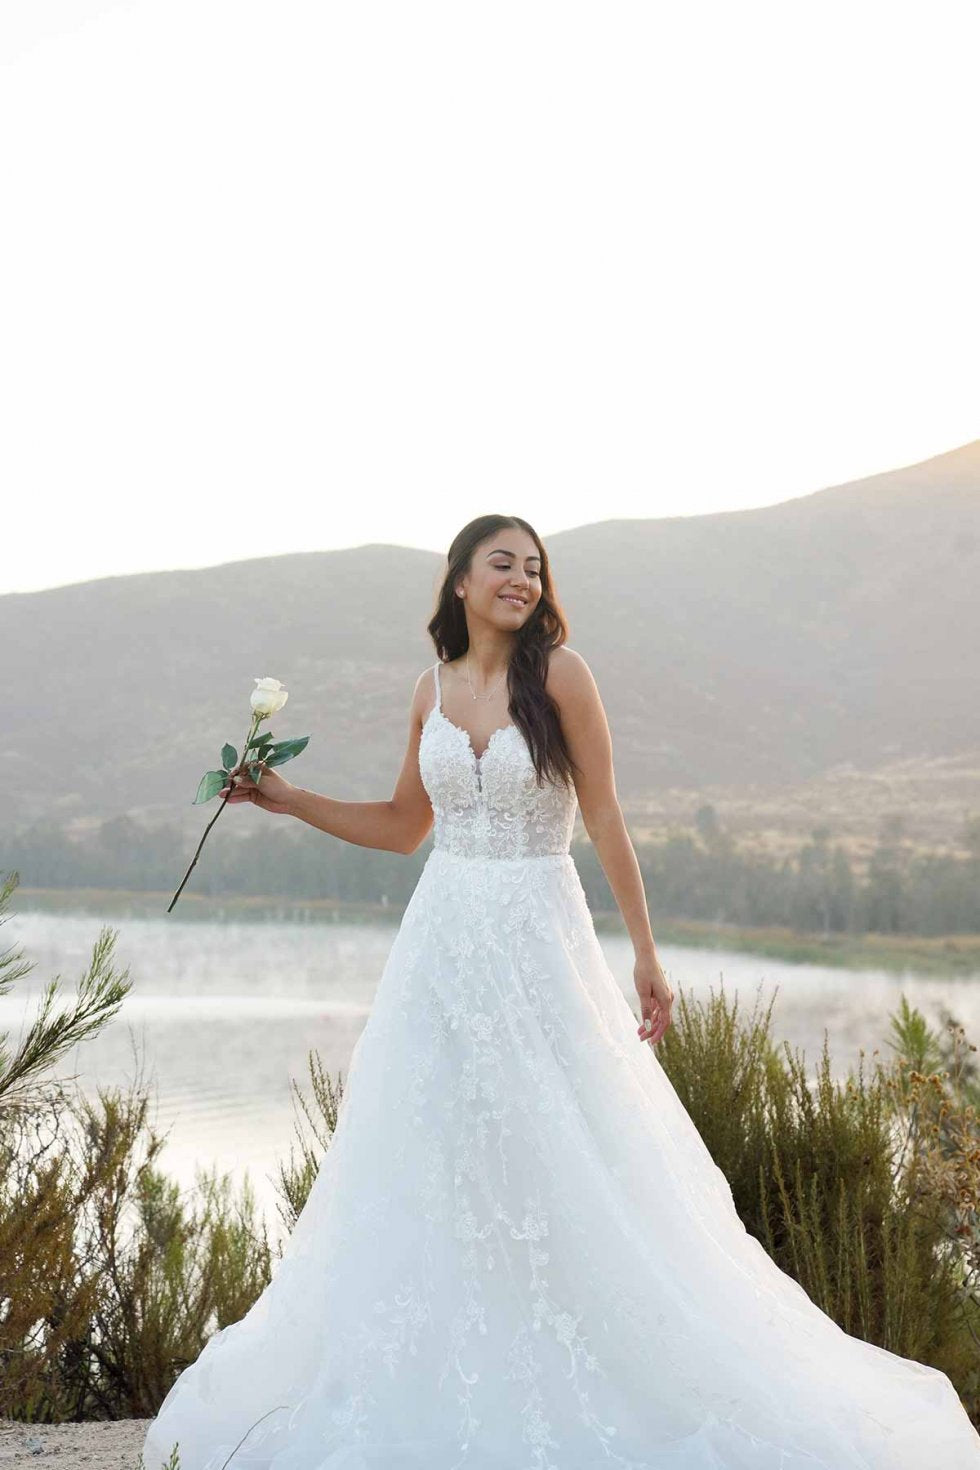 Tulle Skirt Wedding Dress With Lace Detail 